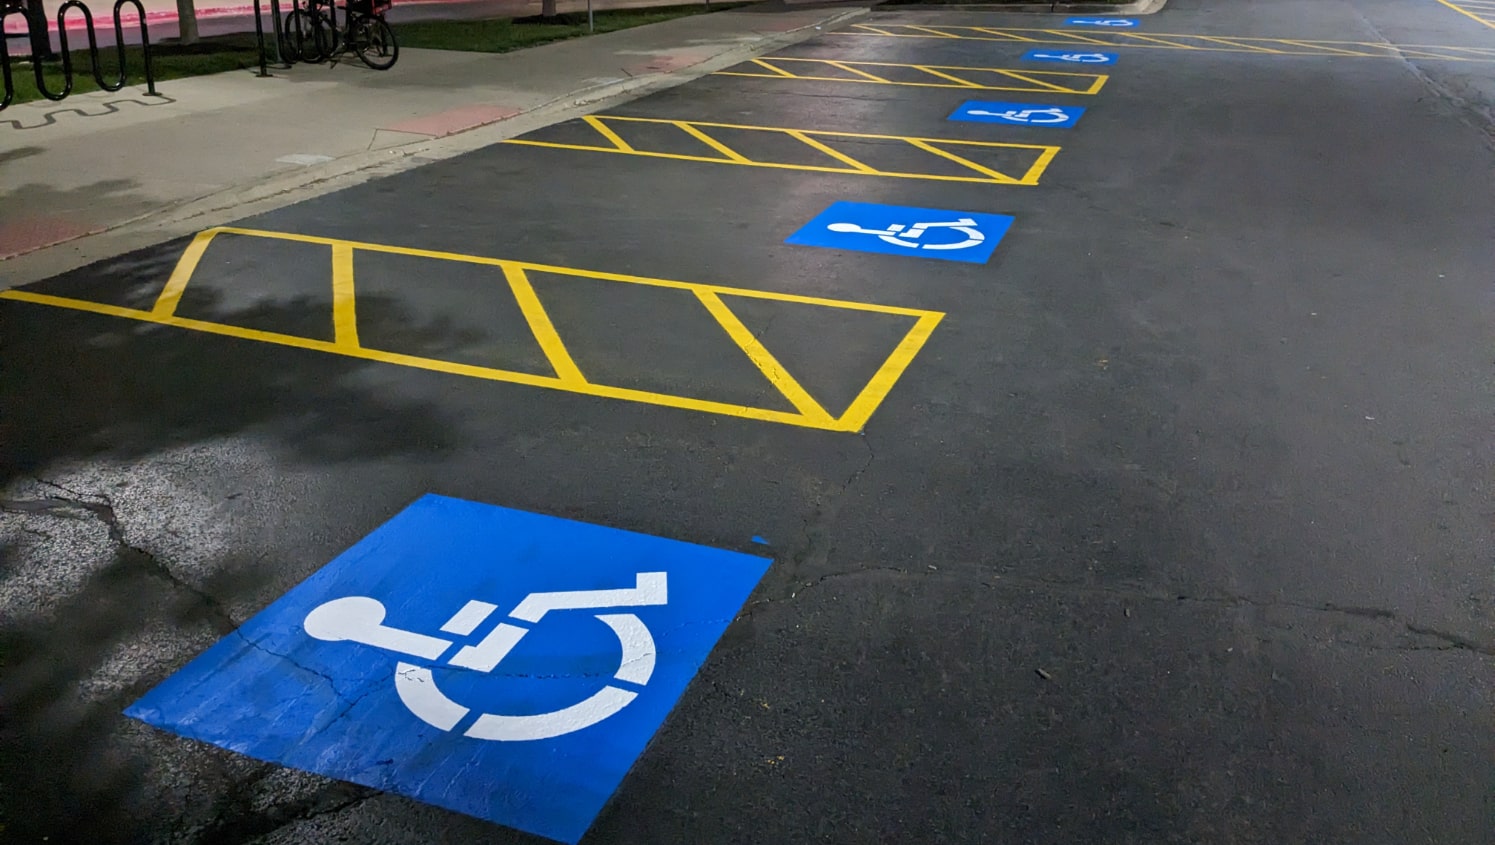 freshly painted ADA-compliant parking stalls and walkways